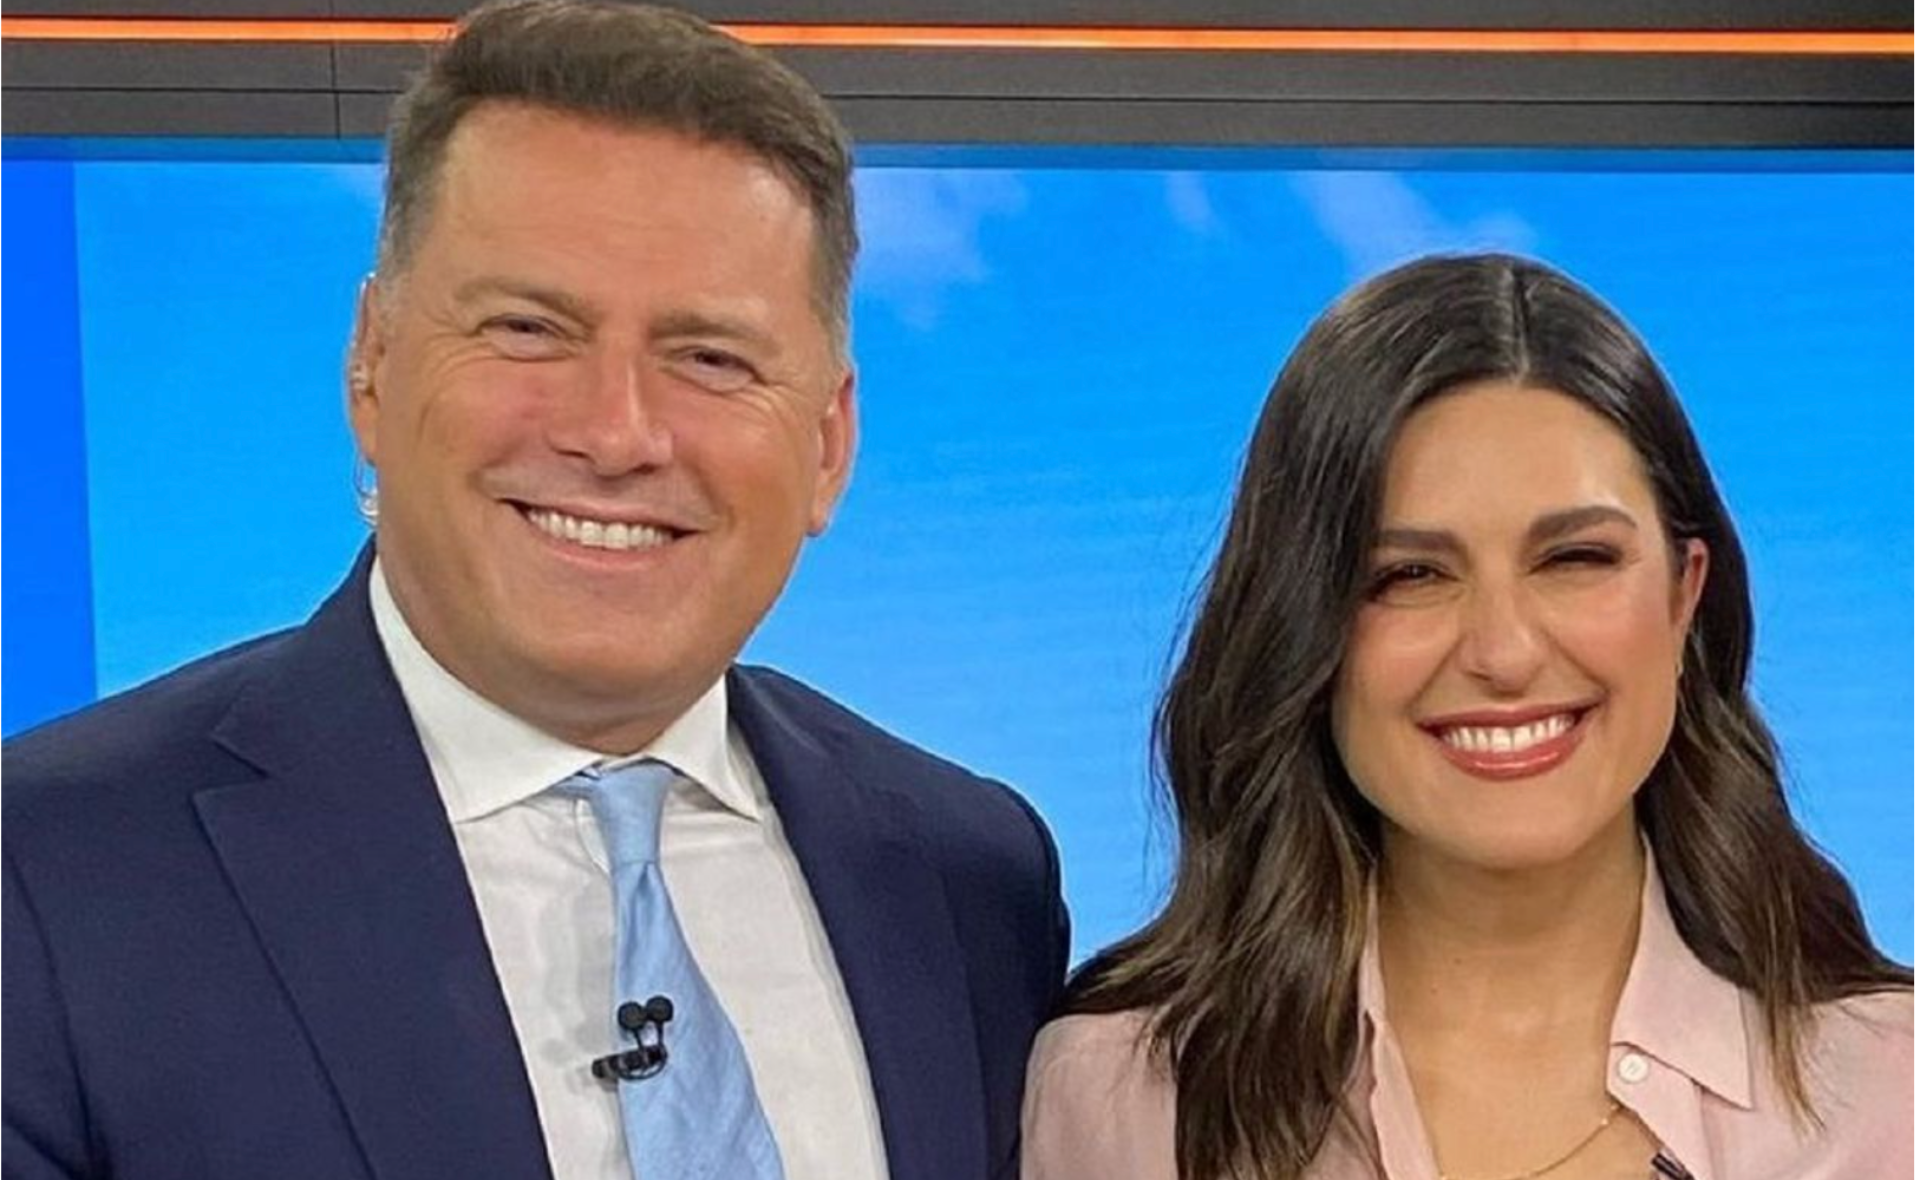 Pressure mounts for Today hosts Karl Stefanovic and Sarah Abo amid ratings battle